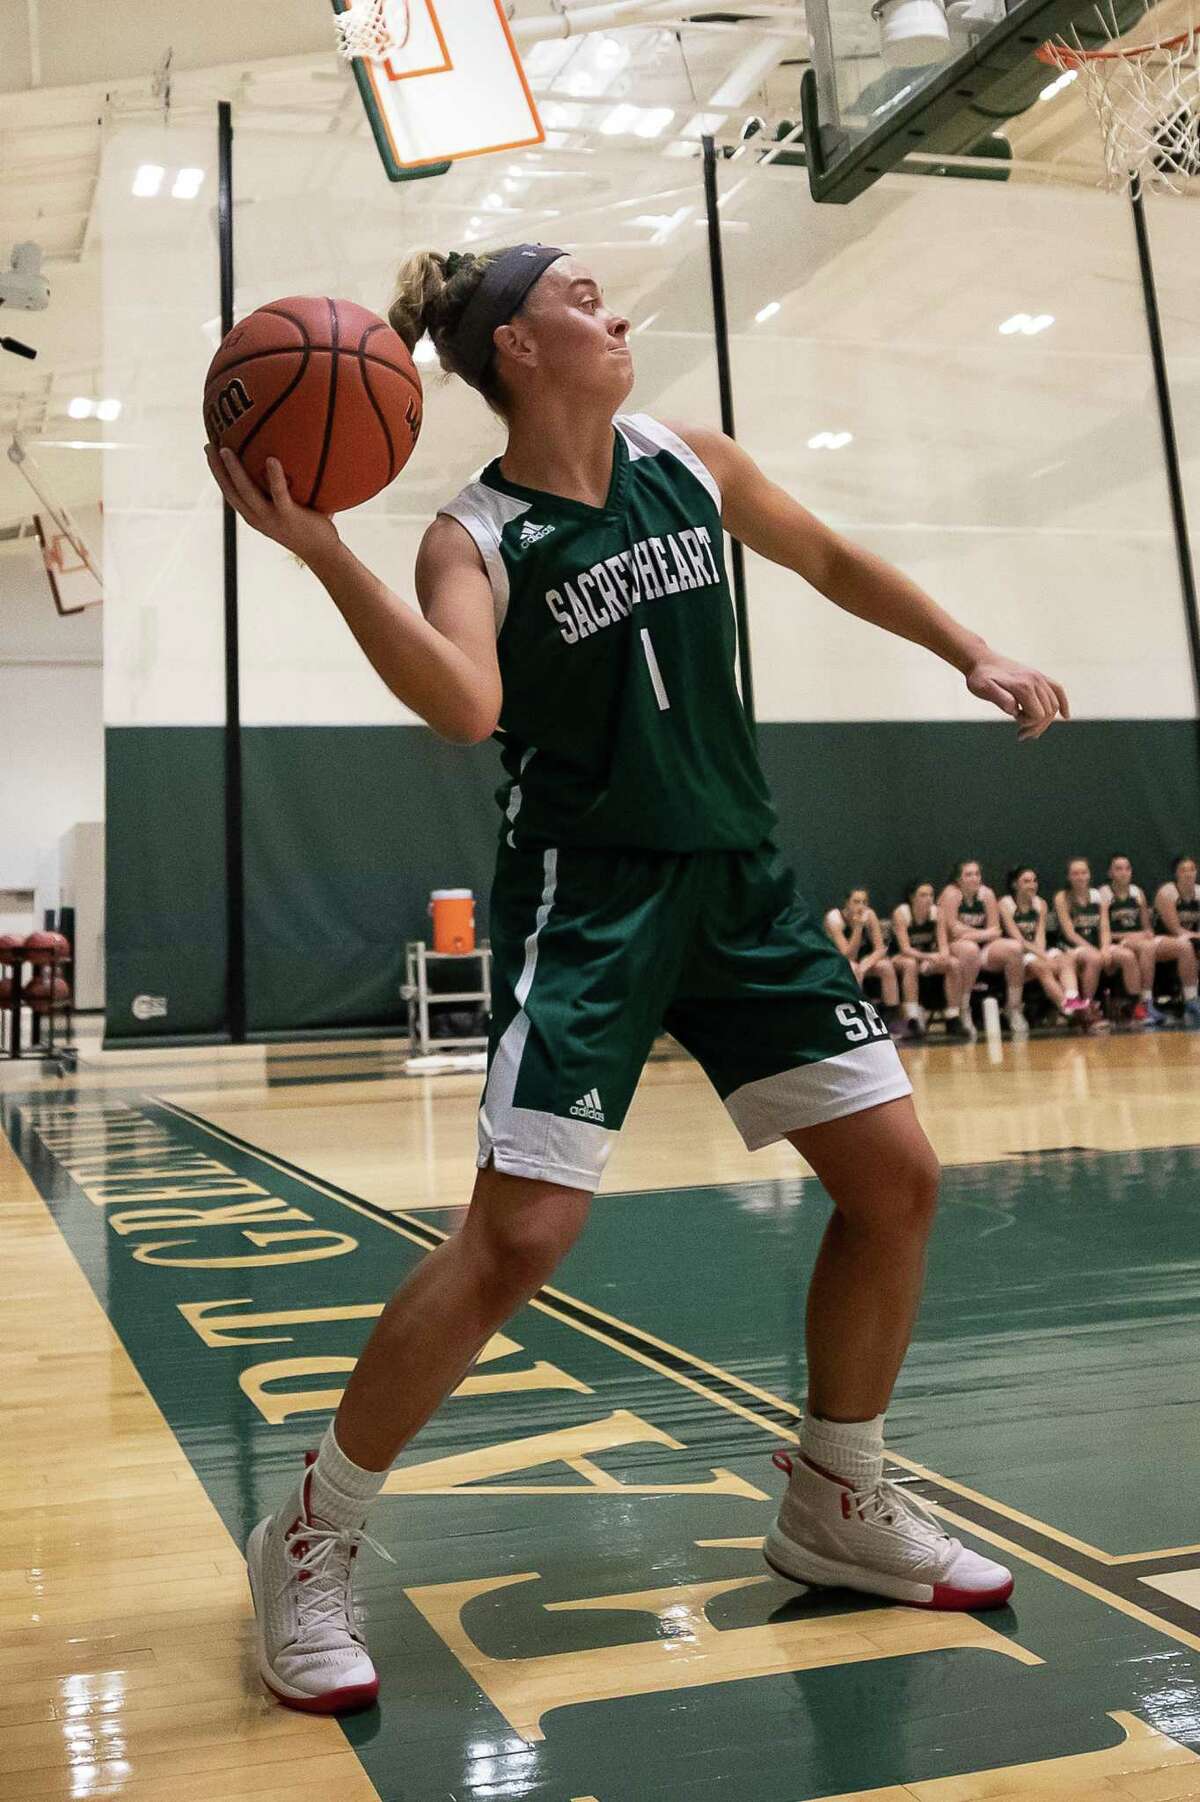 Ryan Smith (1) of Sacred Heart launches the ball the length of the court during a game between Choate Rosemary Hall and Sacred Heart Academy on January 18, 2019 at Sacred Heart Academy - Greenwich in Greenwich, CT.